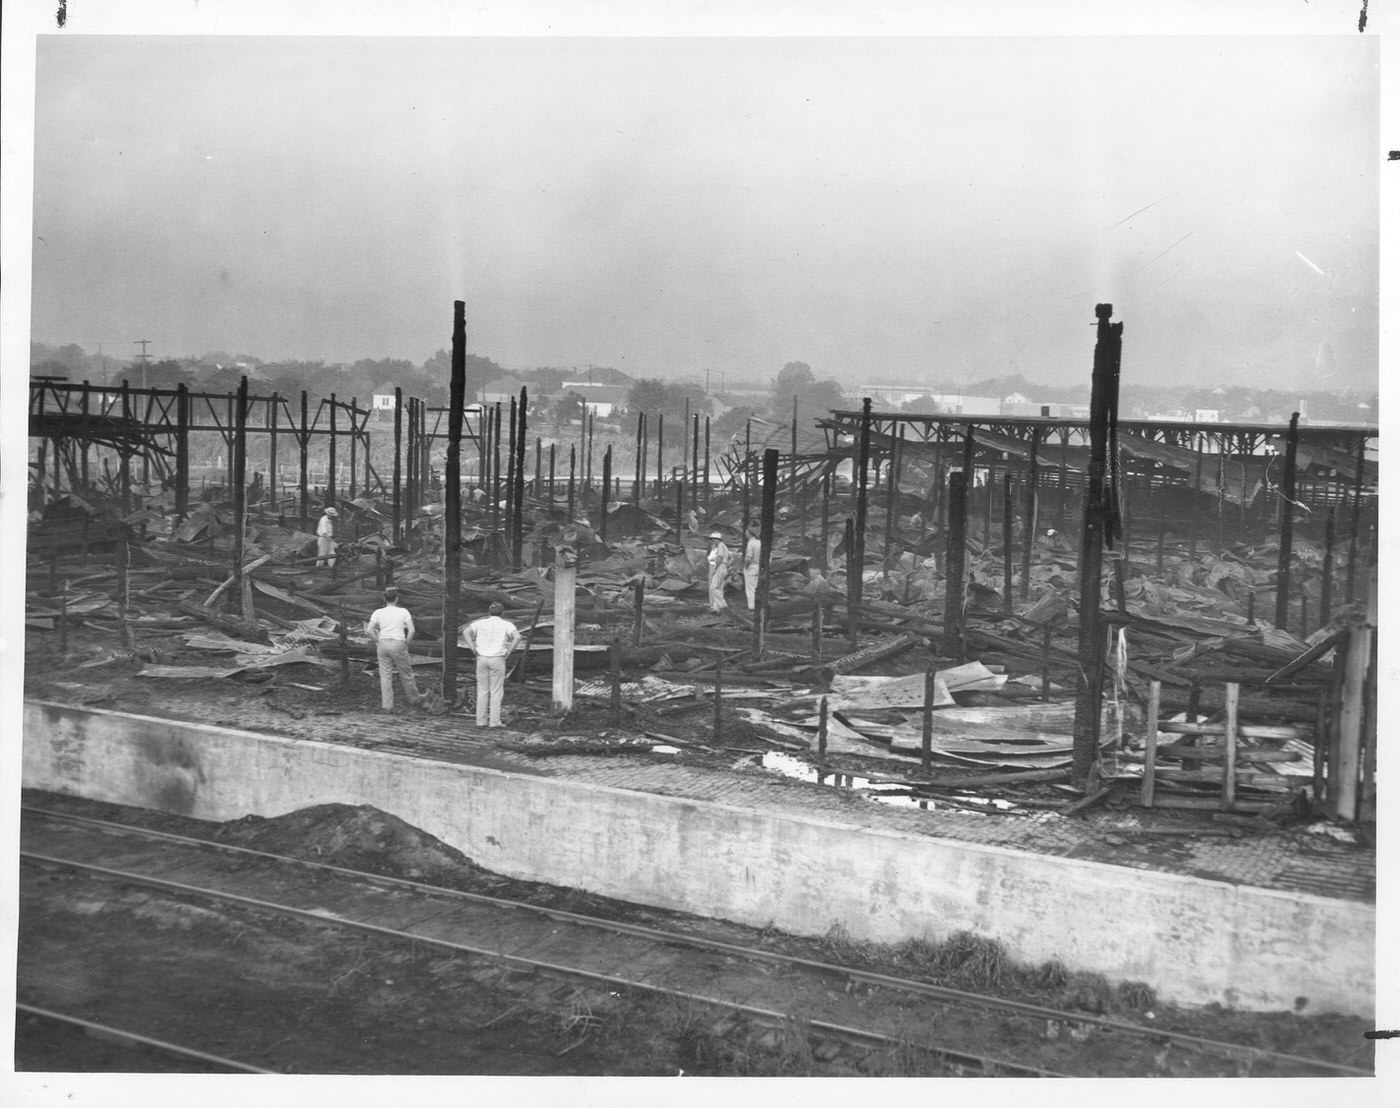 Burned sheep pens in Fort Worth stockyards, 1947